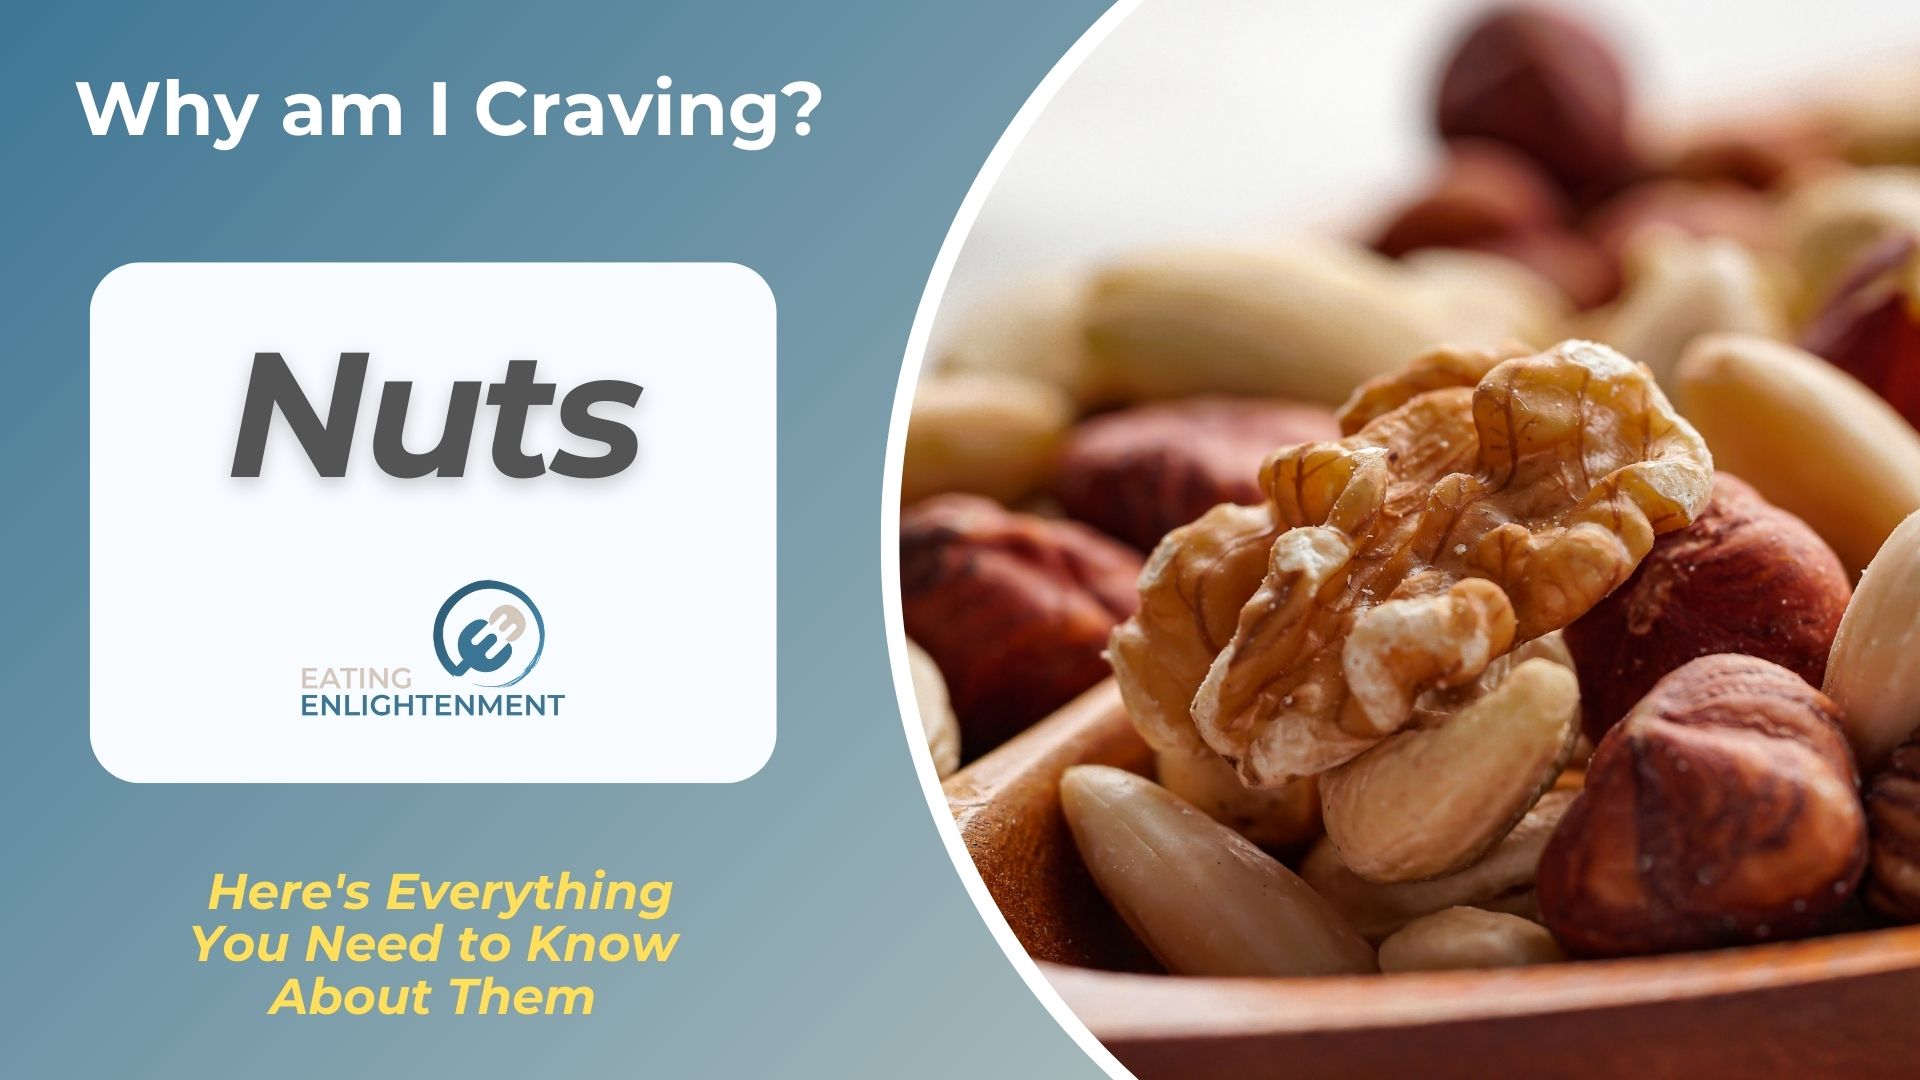 Craving Nuts Here's Everything You Need to Know About Them